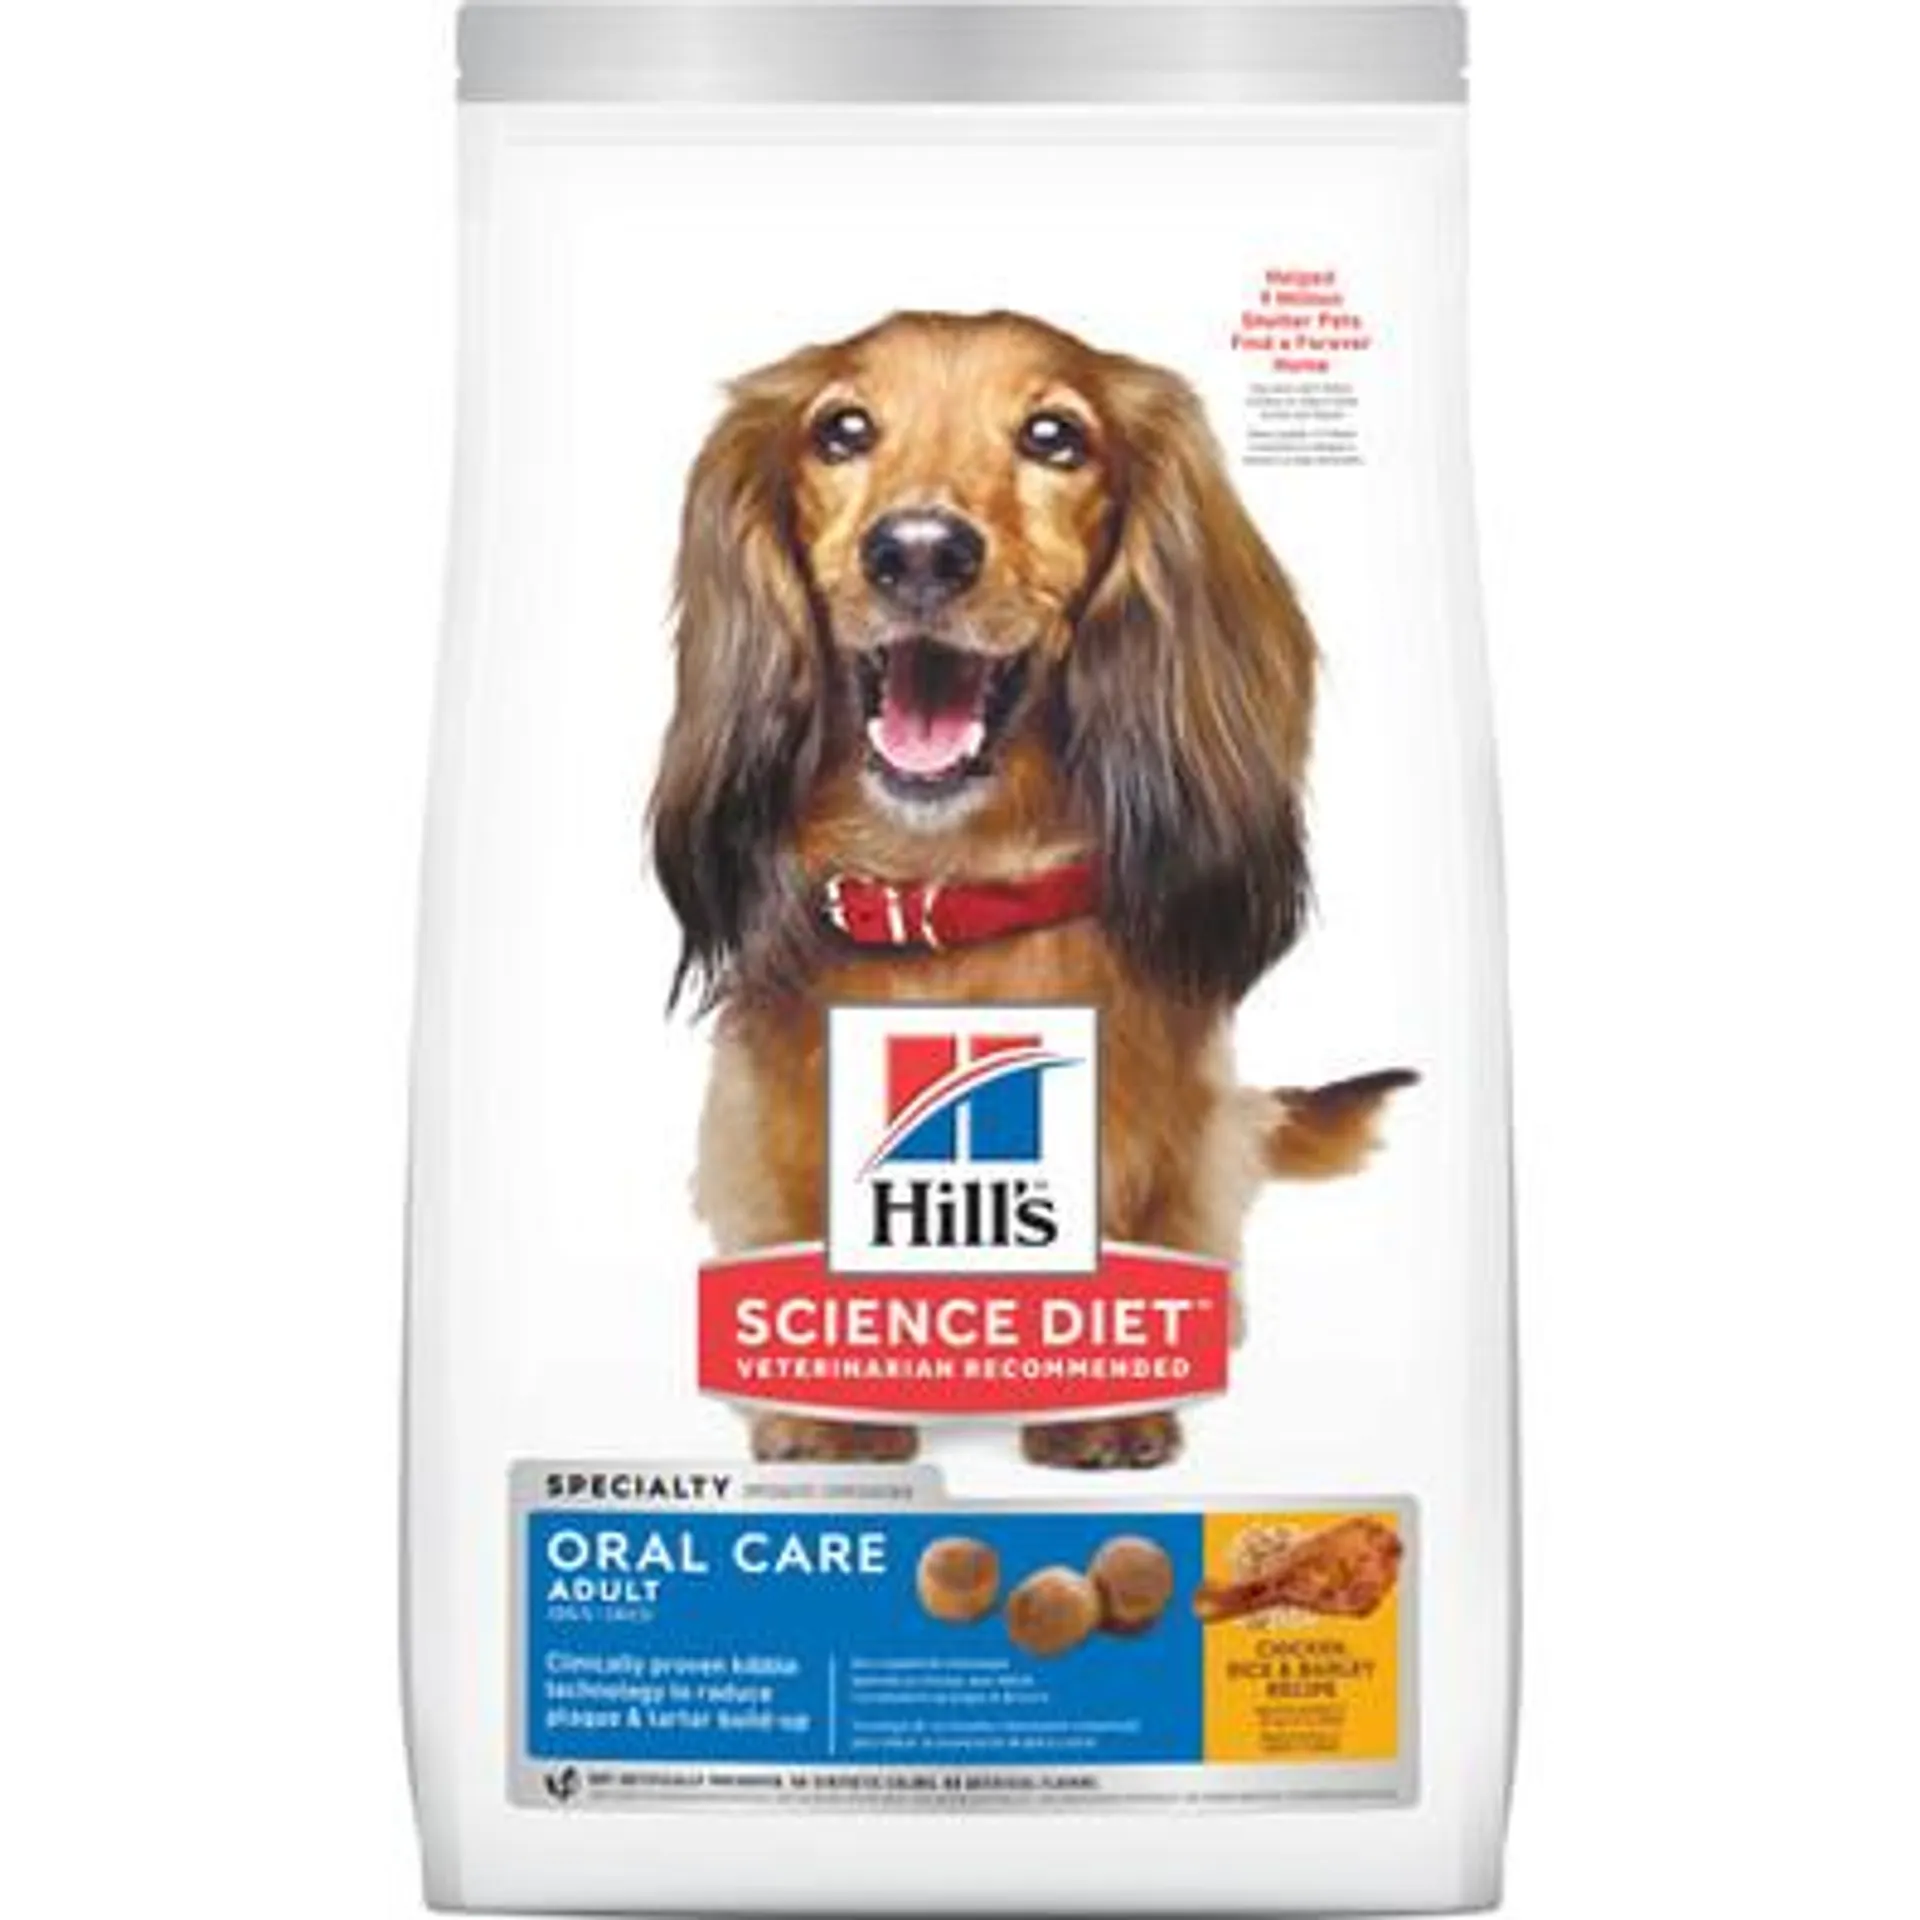 Hill's Science Diet Oral Care Adult Dry Dog Food